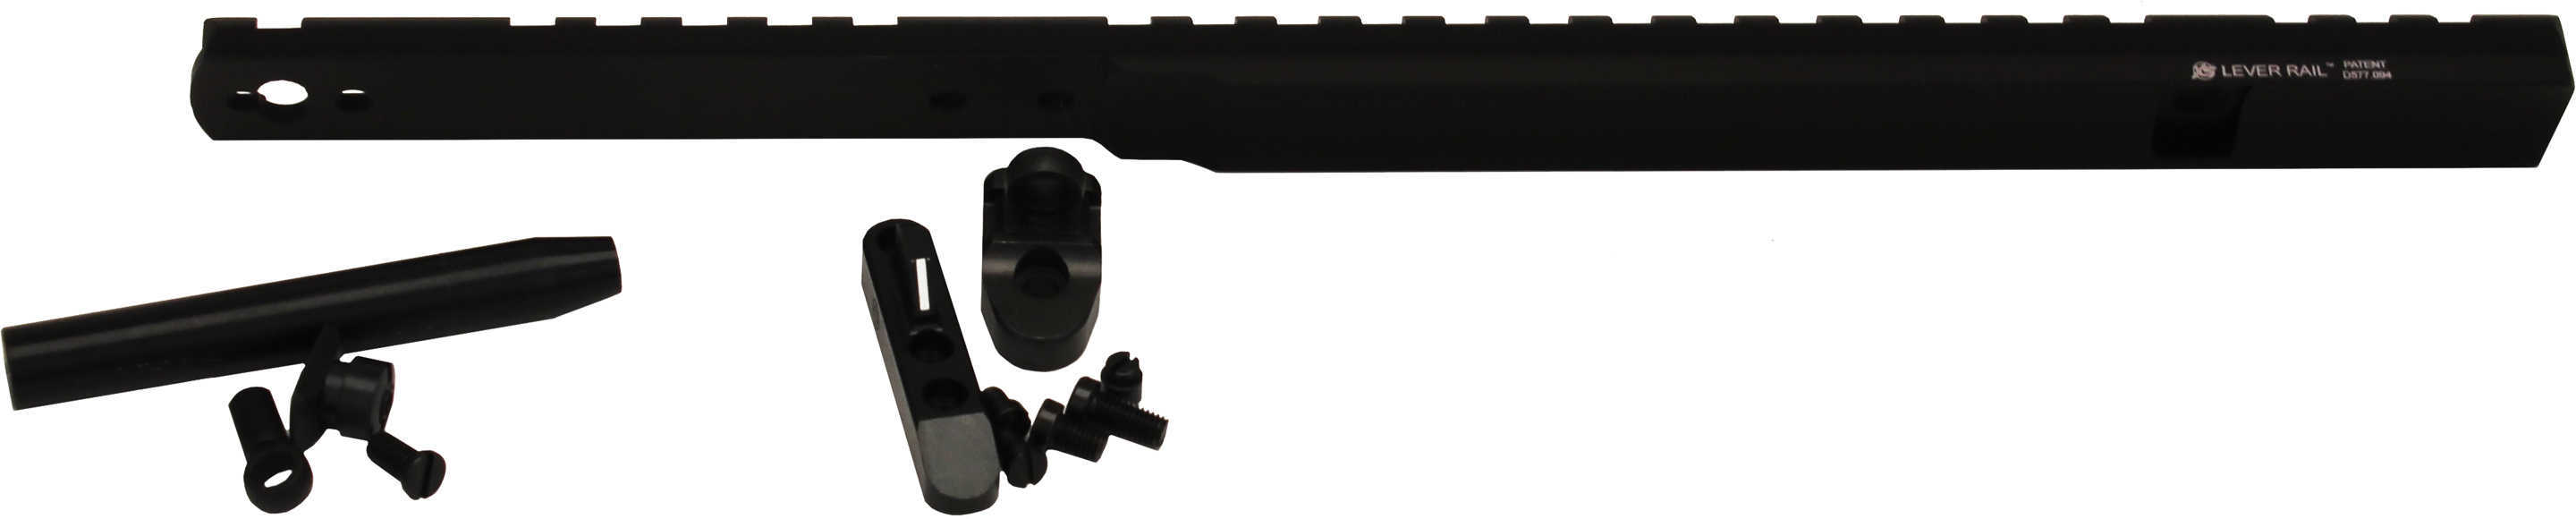 XS Sight Systems Lever Rail Ghost Ring Set For Marlin 1895 Round Bbl.